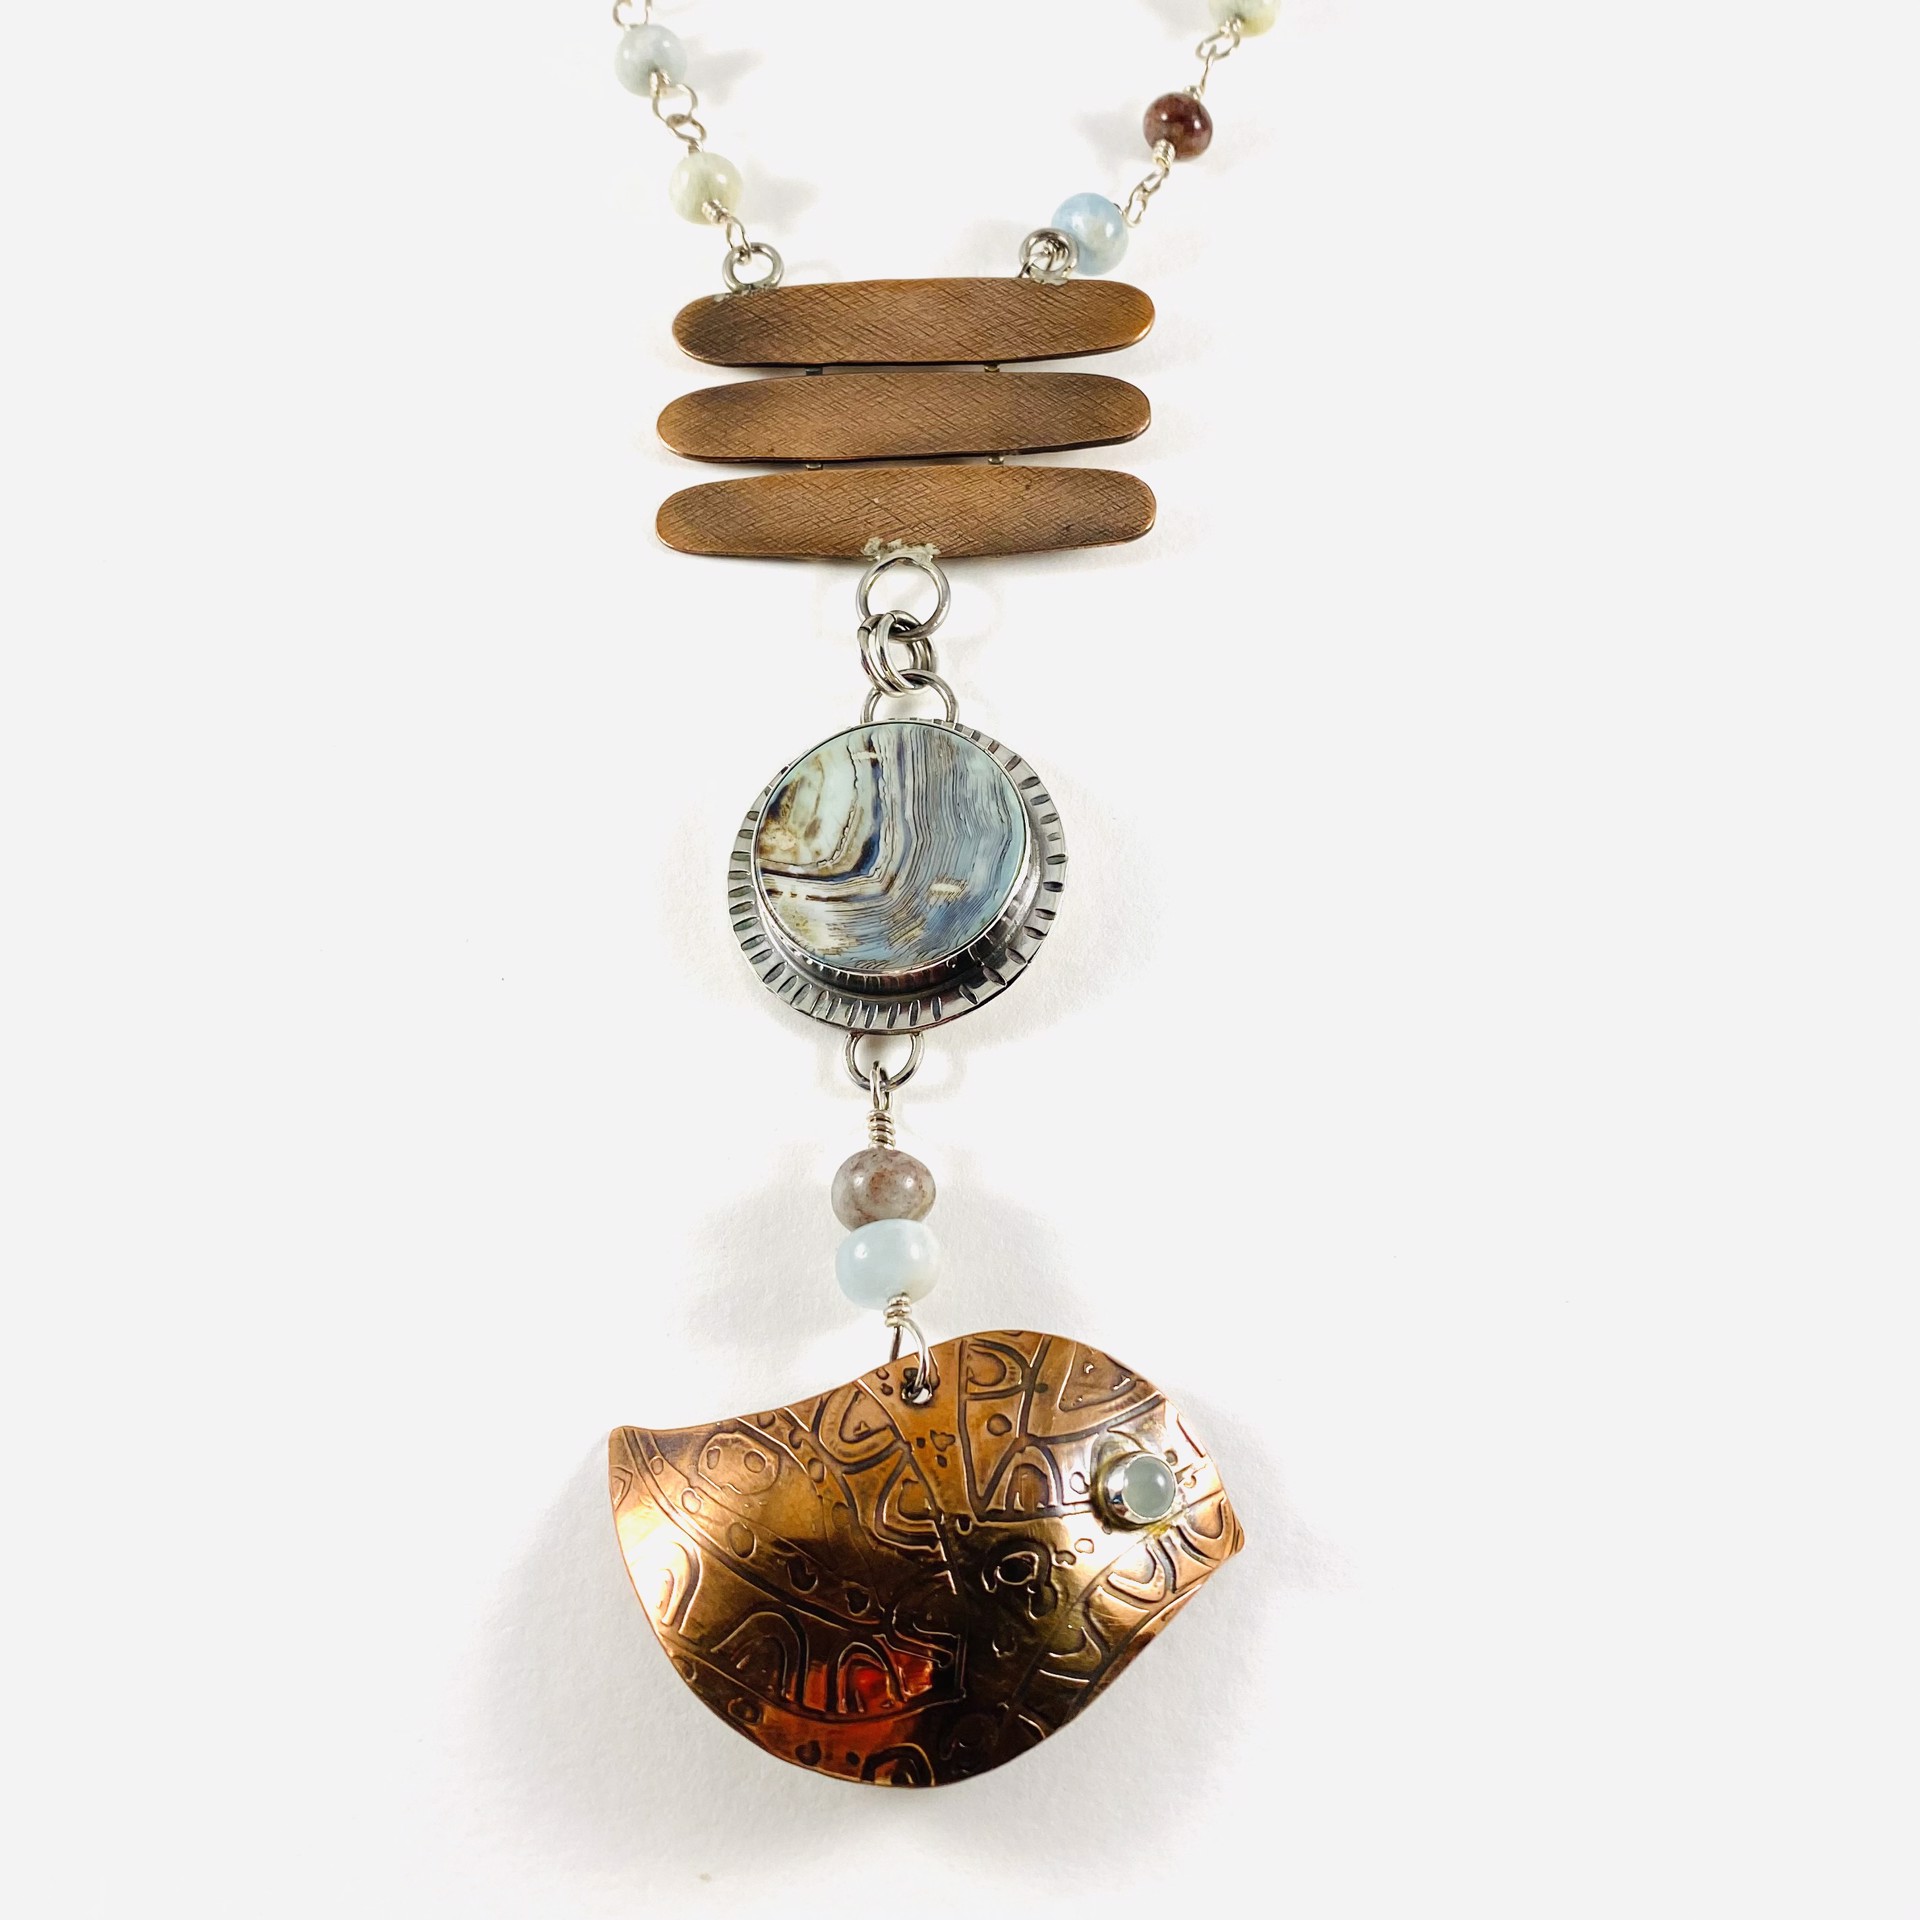 Terra Agate Aquamarine Copper  (5.5")Pendant on 25"Beaded Chain Necklace by Anne Bivens